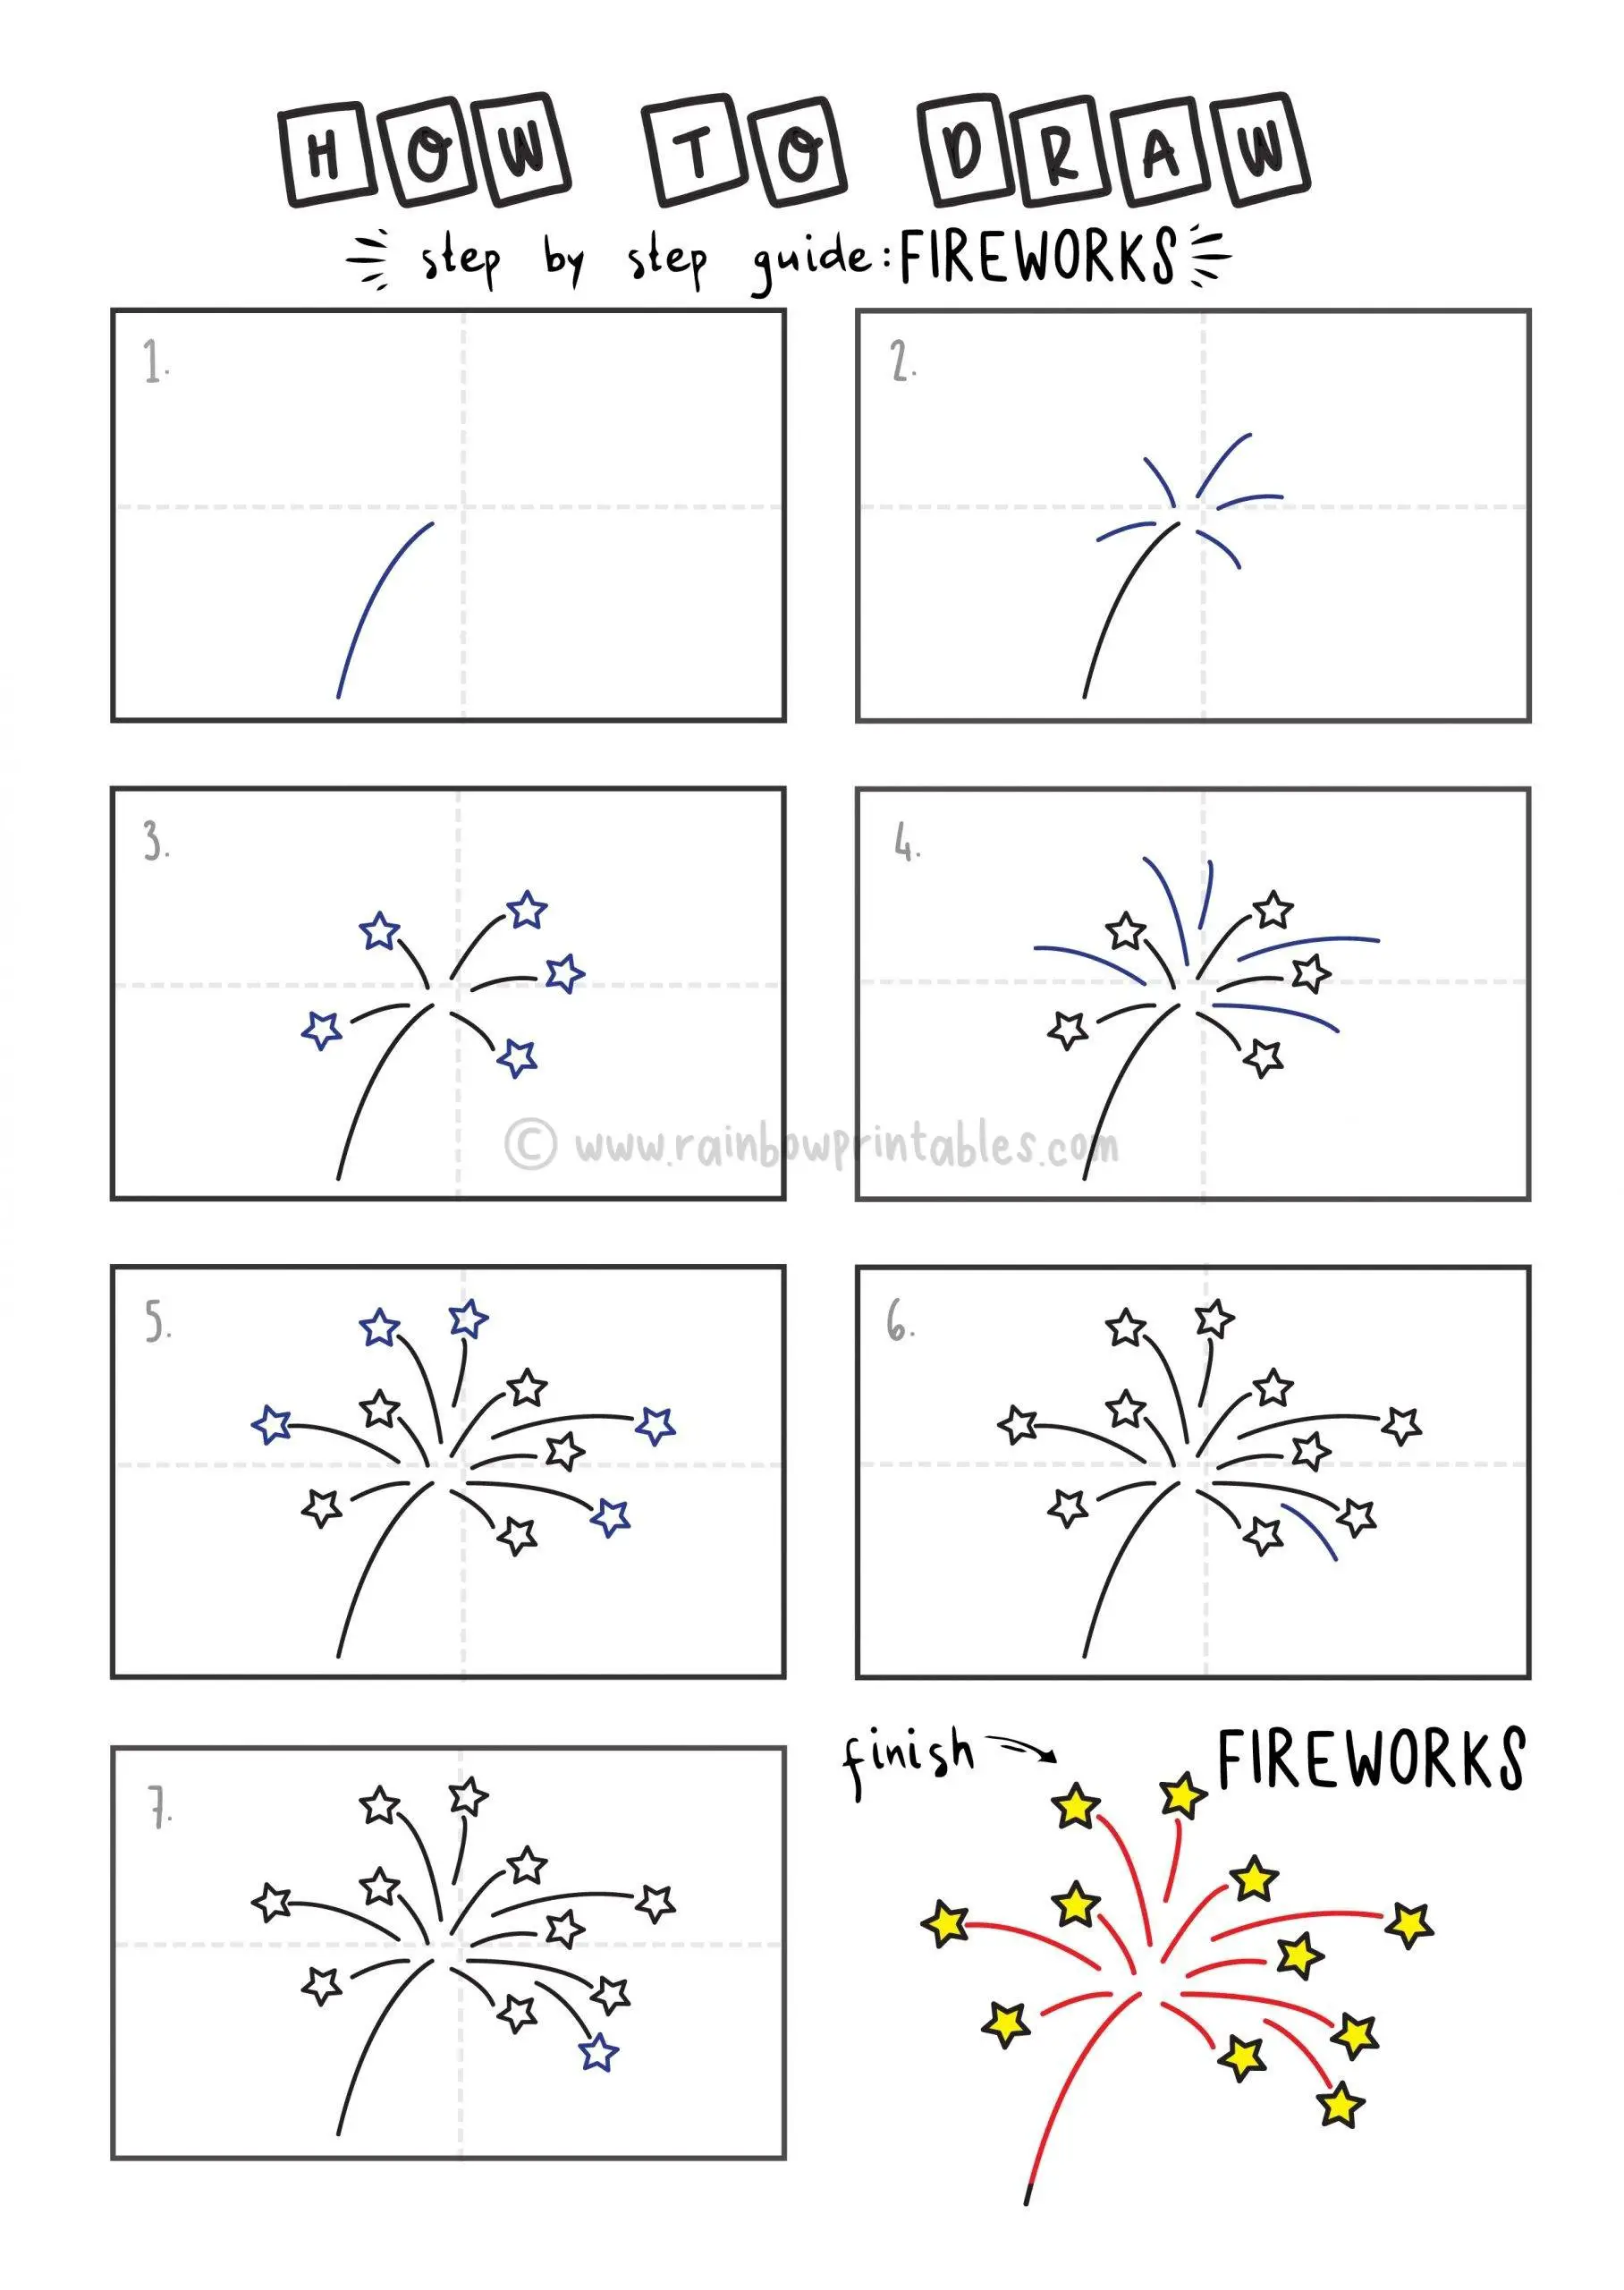 How To Draw Tutorials For Kids Fireworks YOUNG KIDS EASY DRAWINGS ART GUIDE STEP BY STEP